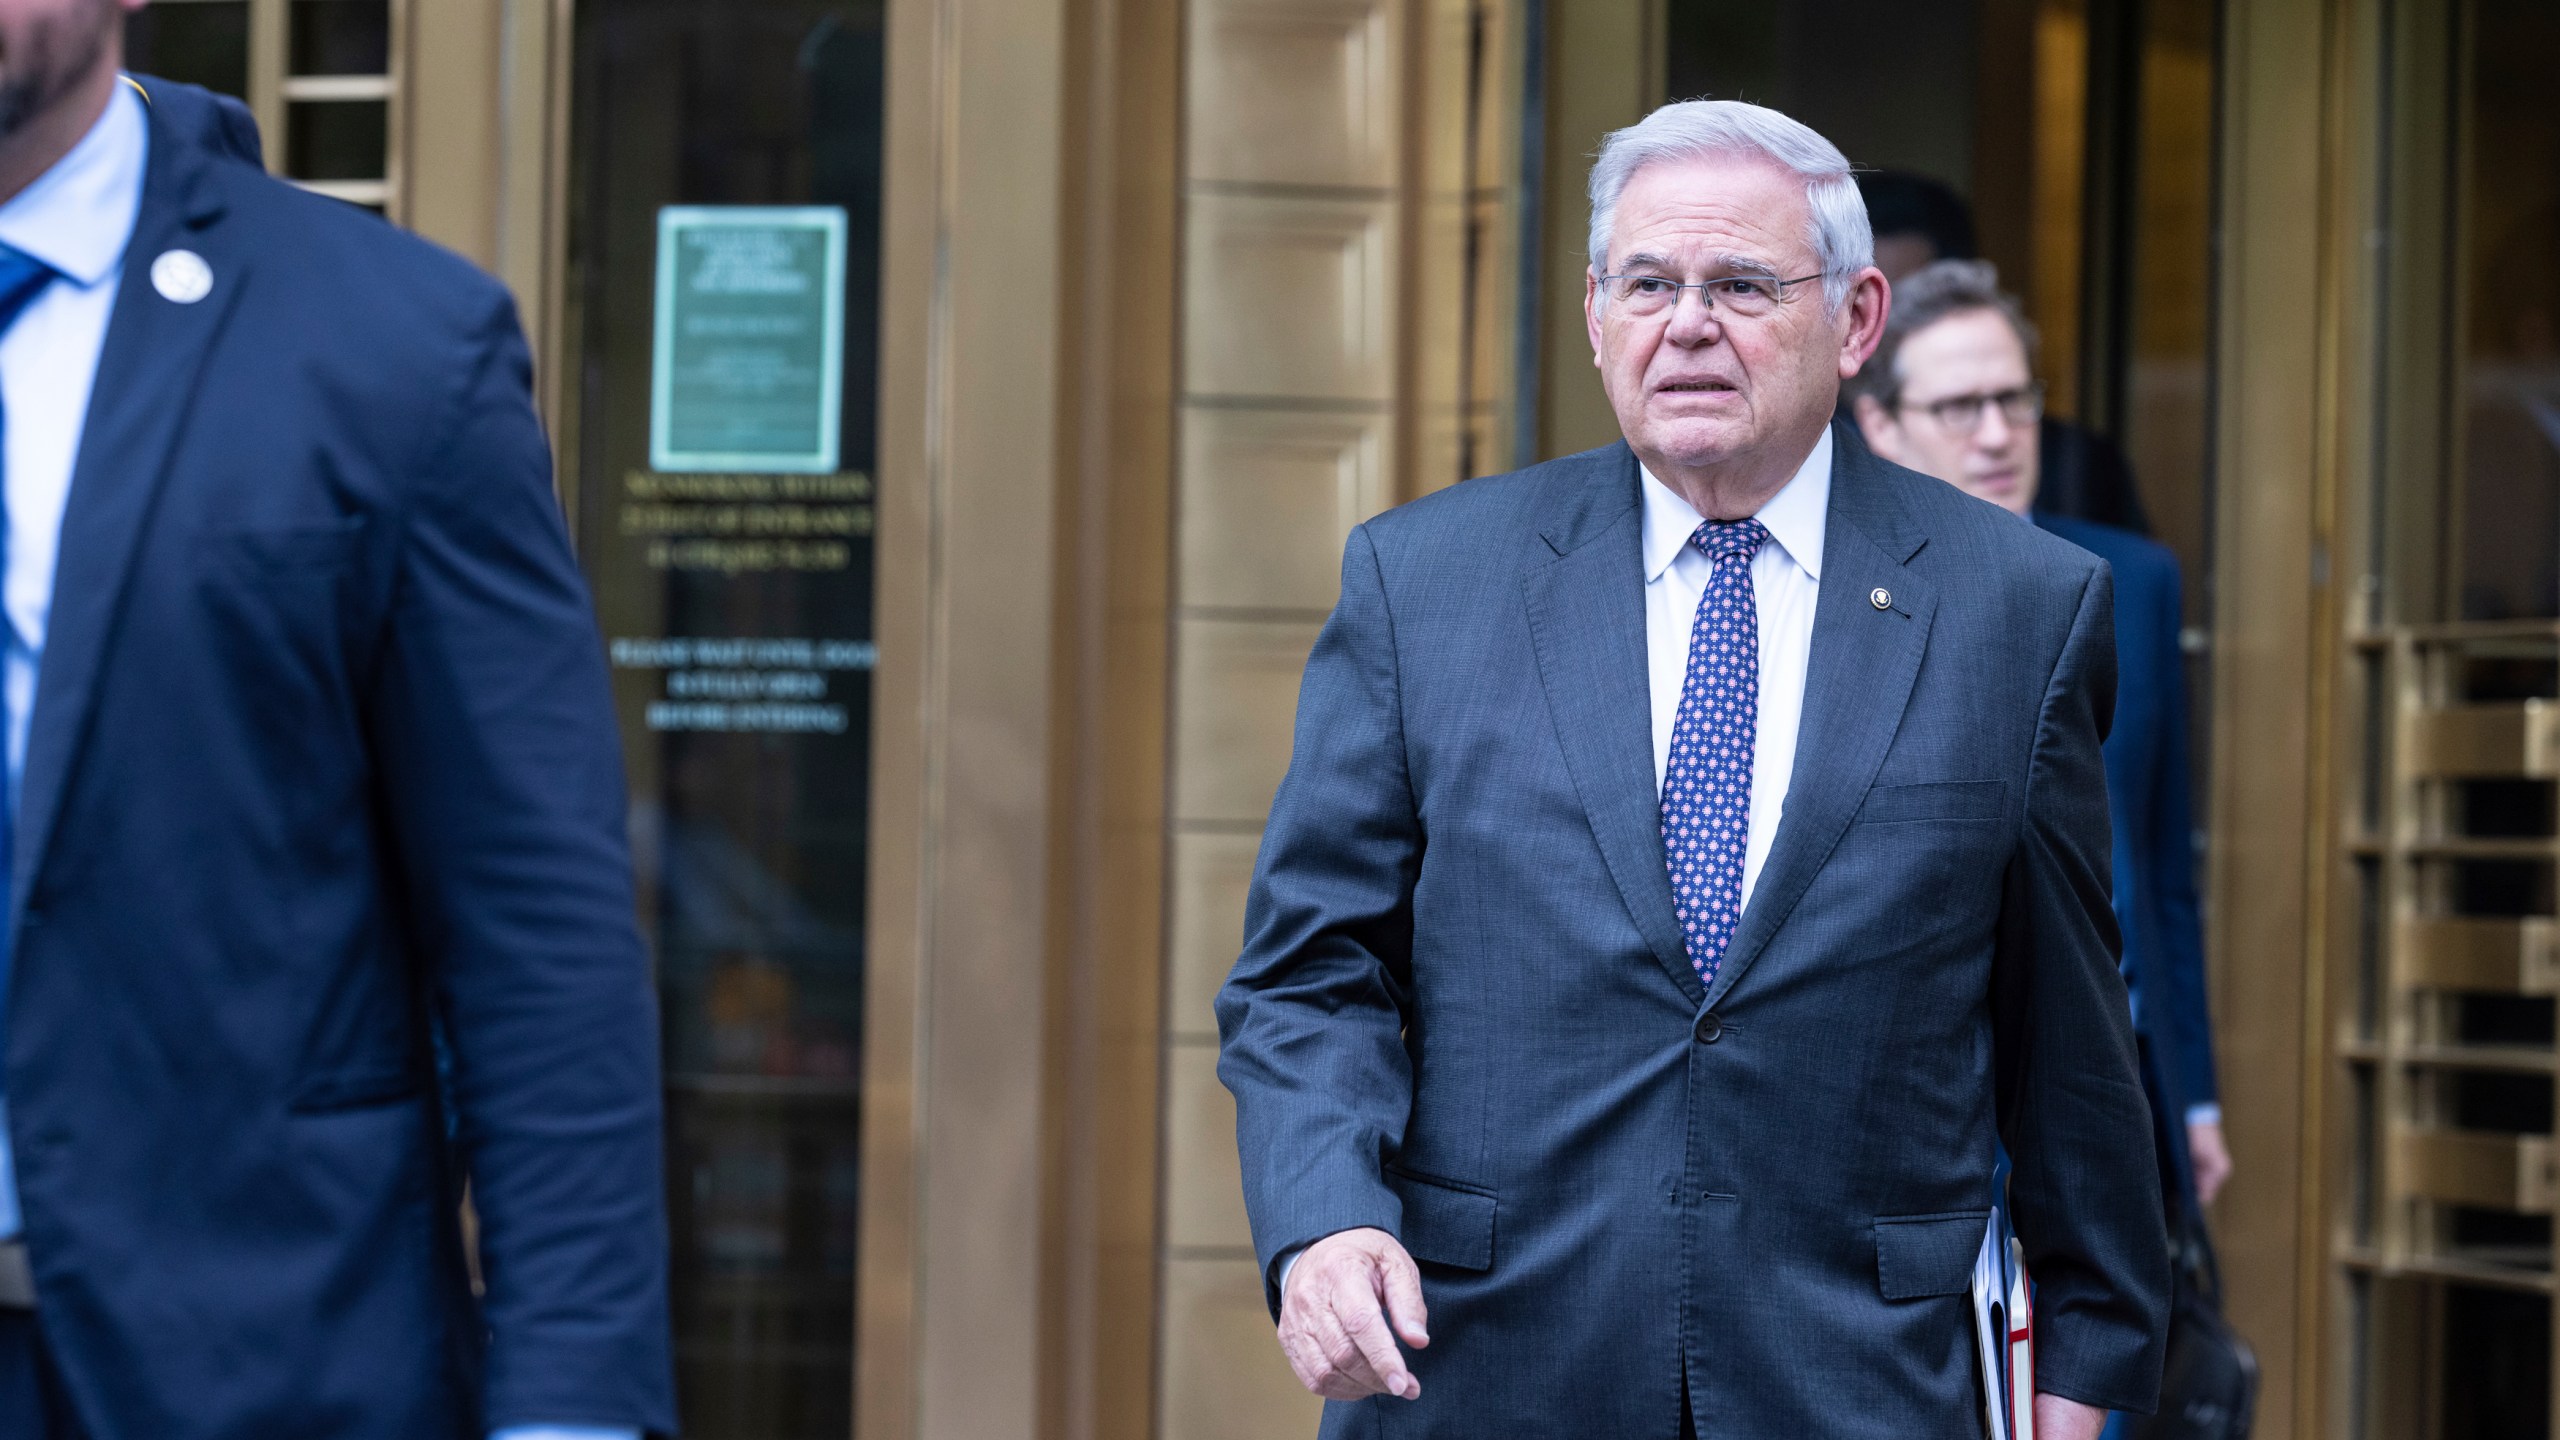 U.S. Sen. Bob Menendez, D-N.J., leaves Manhattan federal court after the second day of jury selection in his trial, Tuesday, May 14, 2024, in New York. The Democrat has pleaded not guilty to bribery, extortion, fraud and obstruction of justice, along with acting as a foreign agent of Egypt. (AP Photo/Stefan Jeremiah)